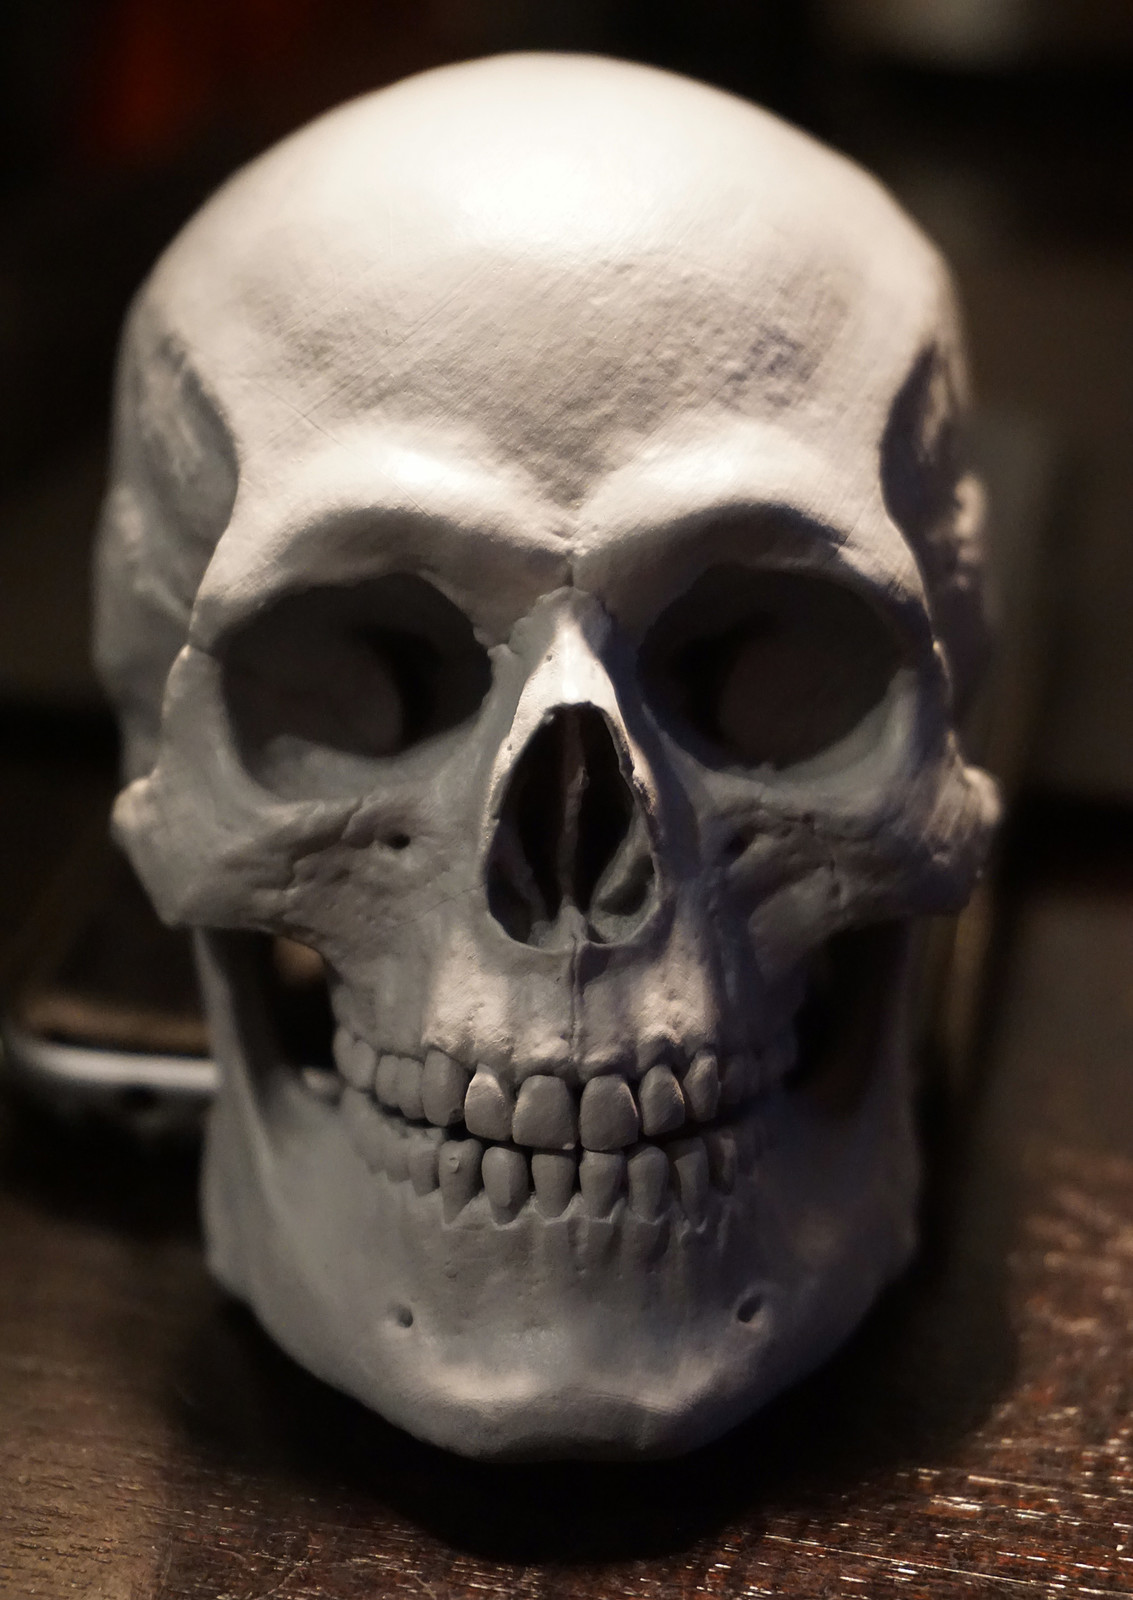 A 3D print of the skull - about the size of a tennis ball.